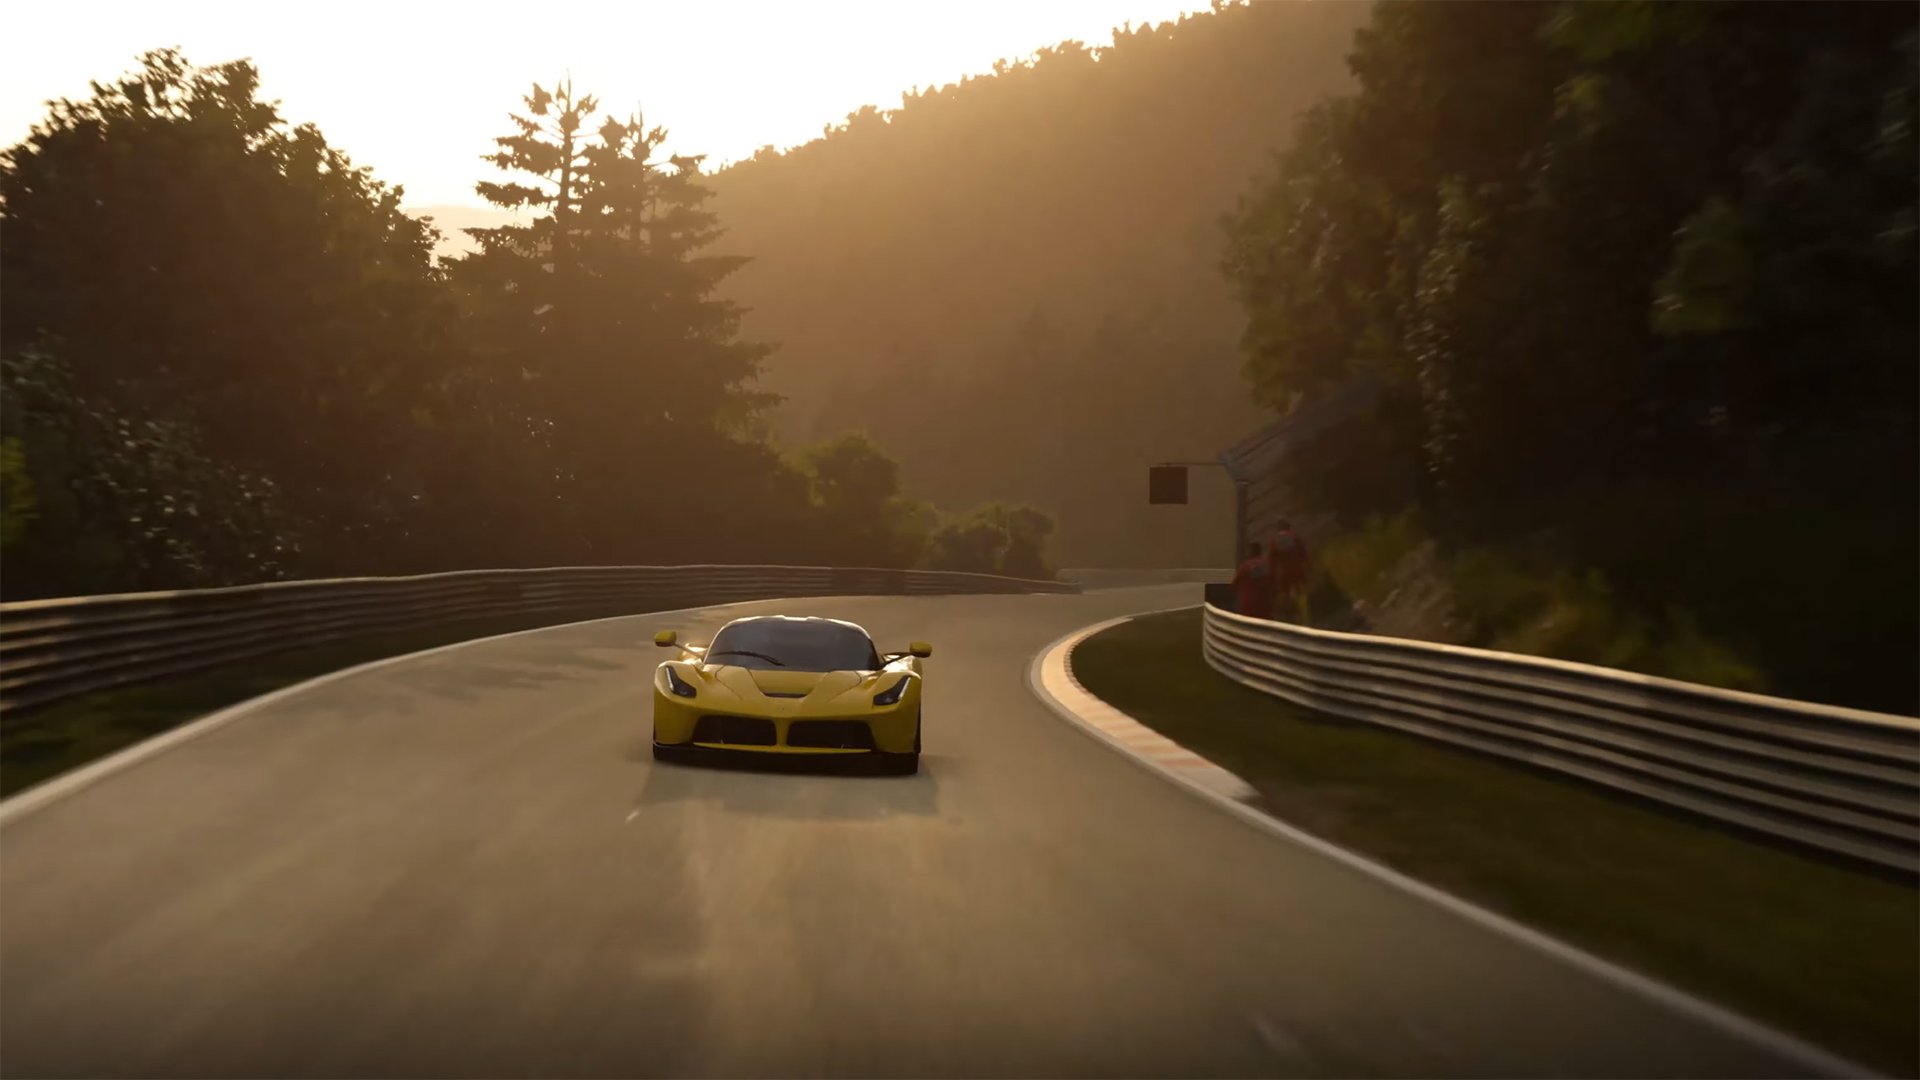 Gran Turismo 7 PS4: New info leaks about GT7 on PlayStation 4